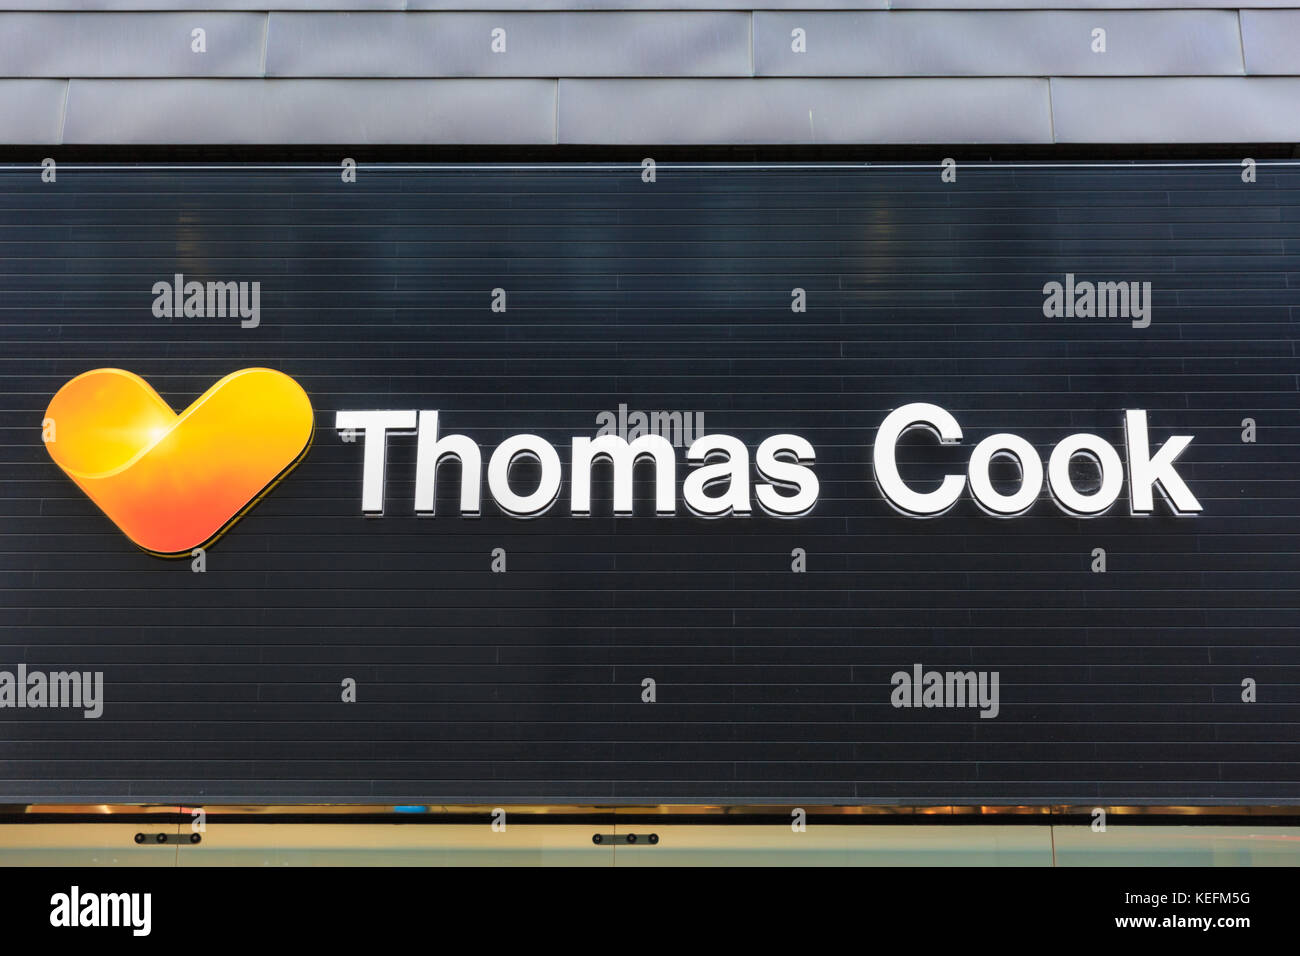 Thomas Cook shop sign, brand logo of the travel agency and tour operator, Westfield Stratford, London Stock Photo